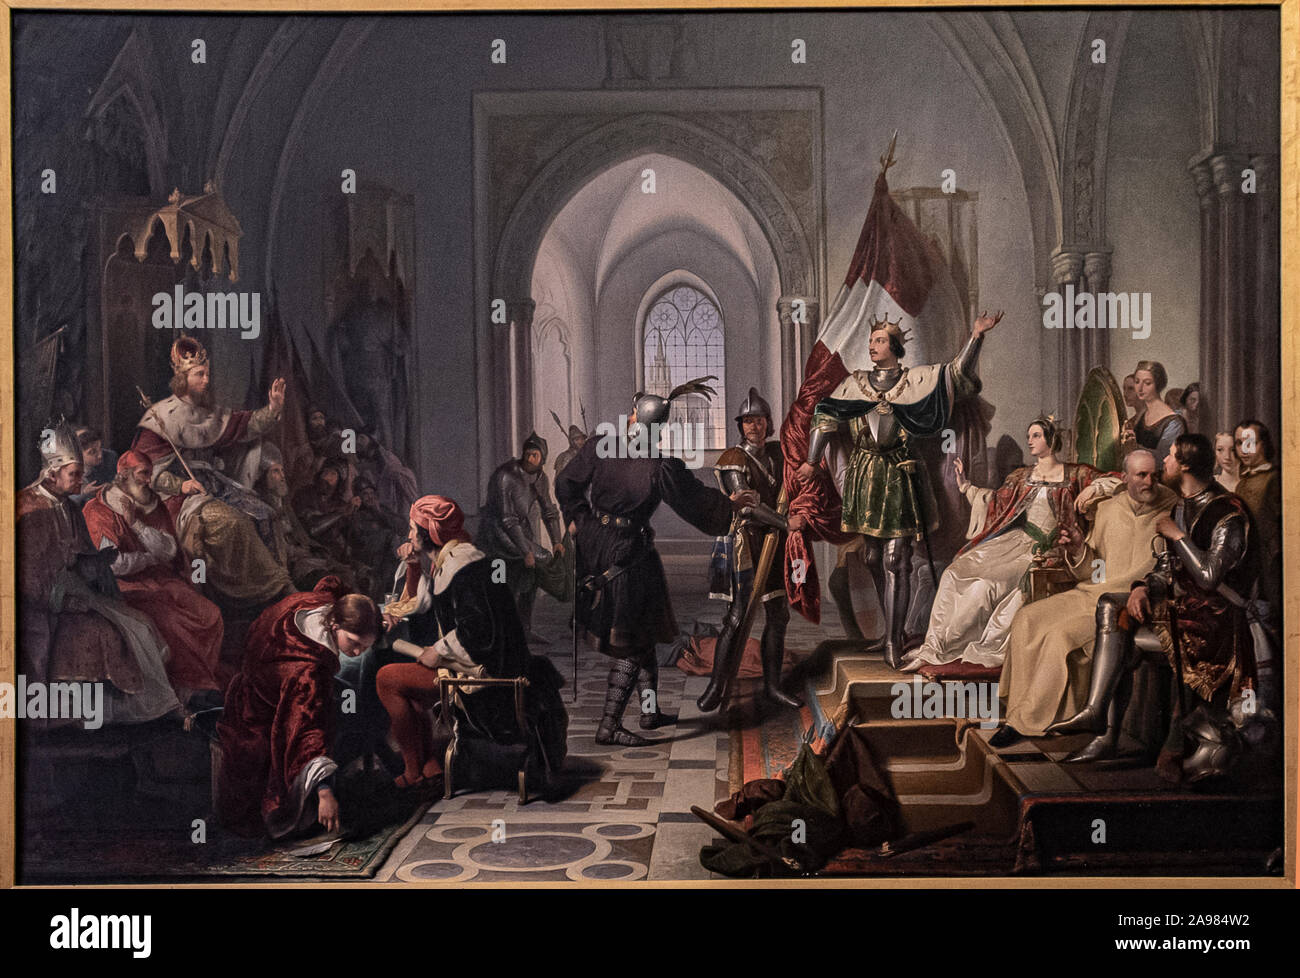 Italy Piedmont Canavese  Agliè - The Castle - sabauda residence - Art Gallery -Fiorione Luigi - Amedeo VI who receives the investiture of all his states in Chambery by emperor Charles IV Stock Photo